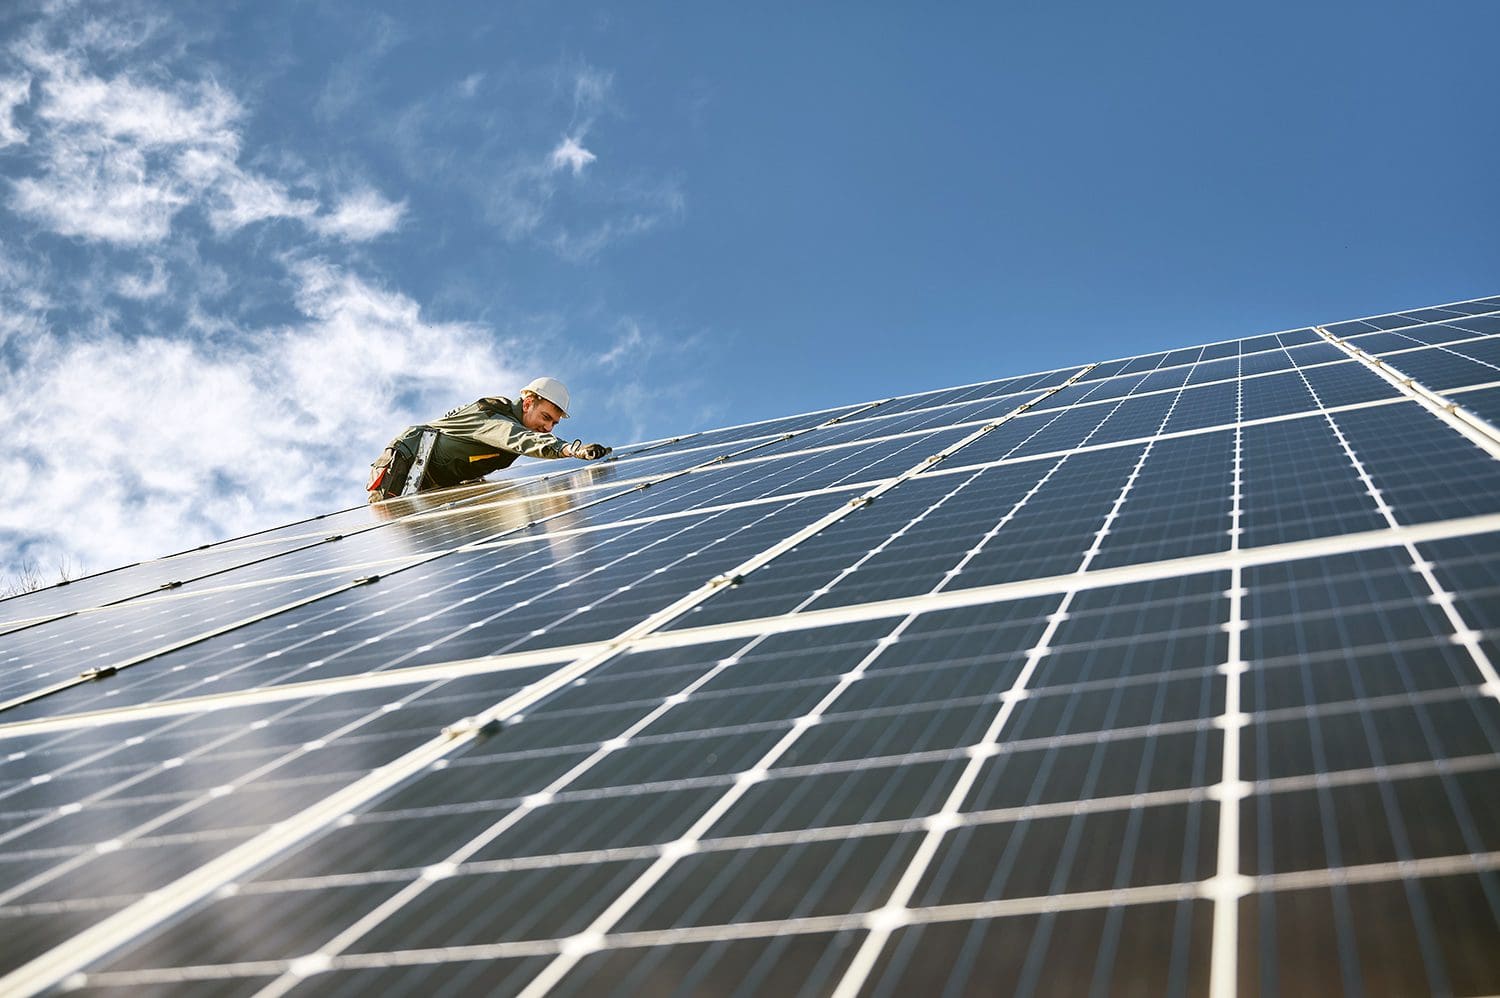 Worker improves corporate sustainability by maintaining solar panels on a roof.